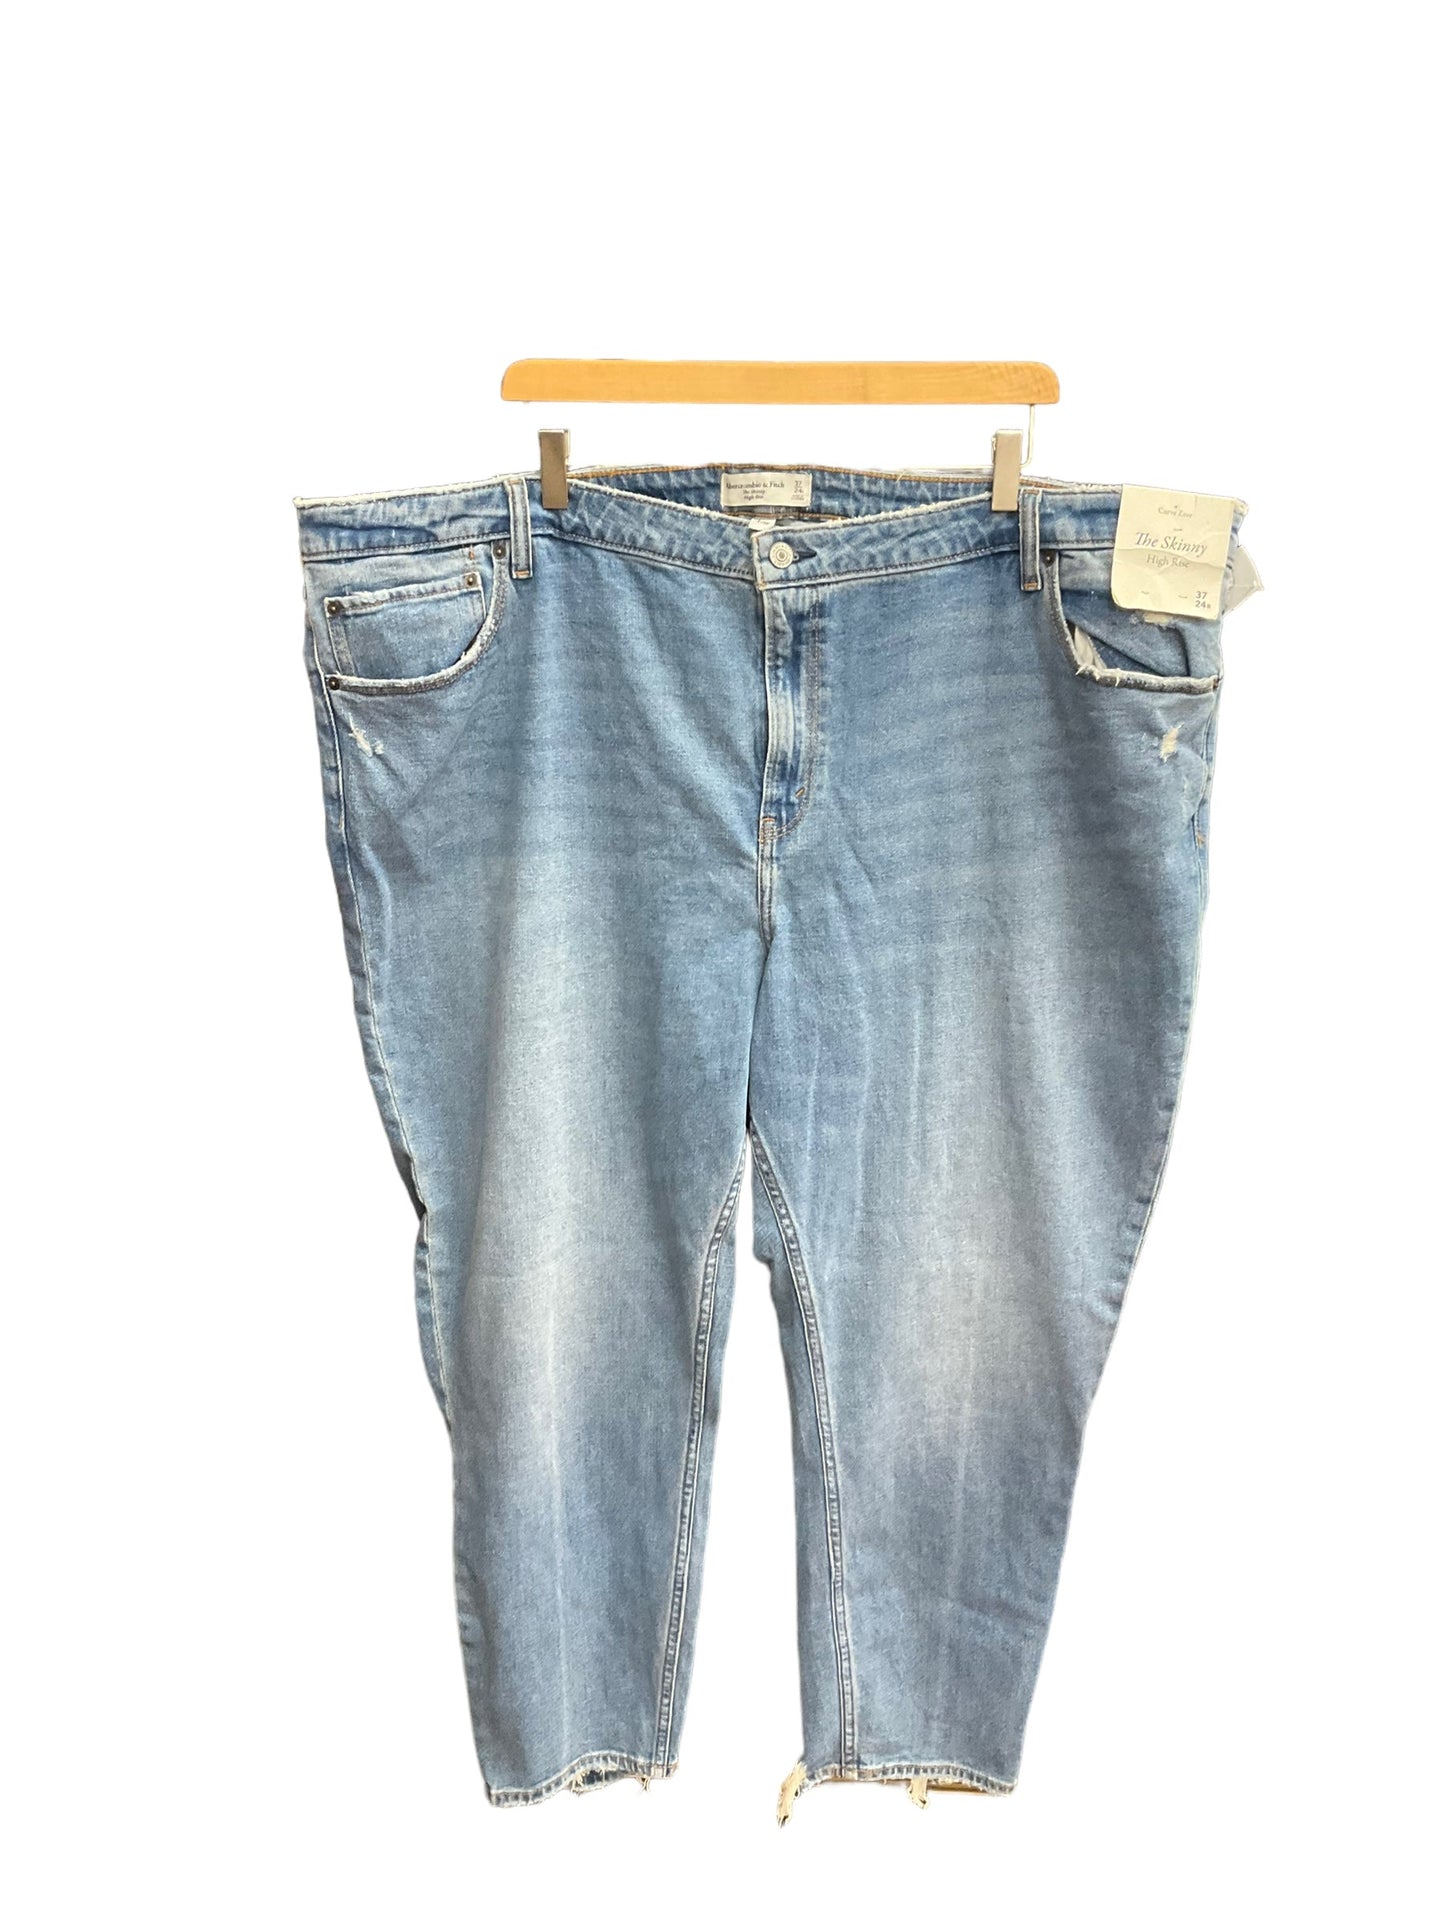 Blue Denim Jeans Skinny Abercrombie And Fitch, Size 24